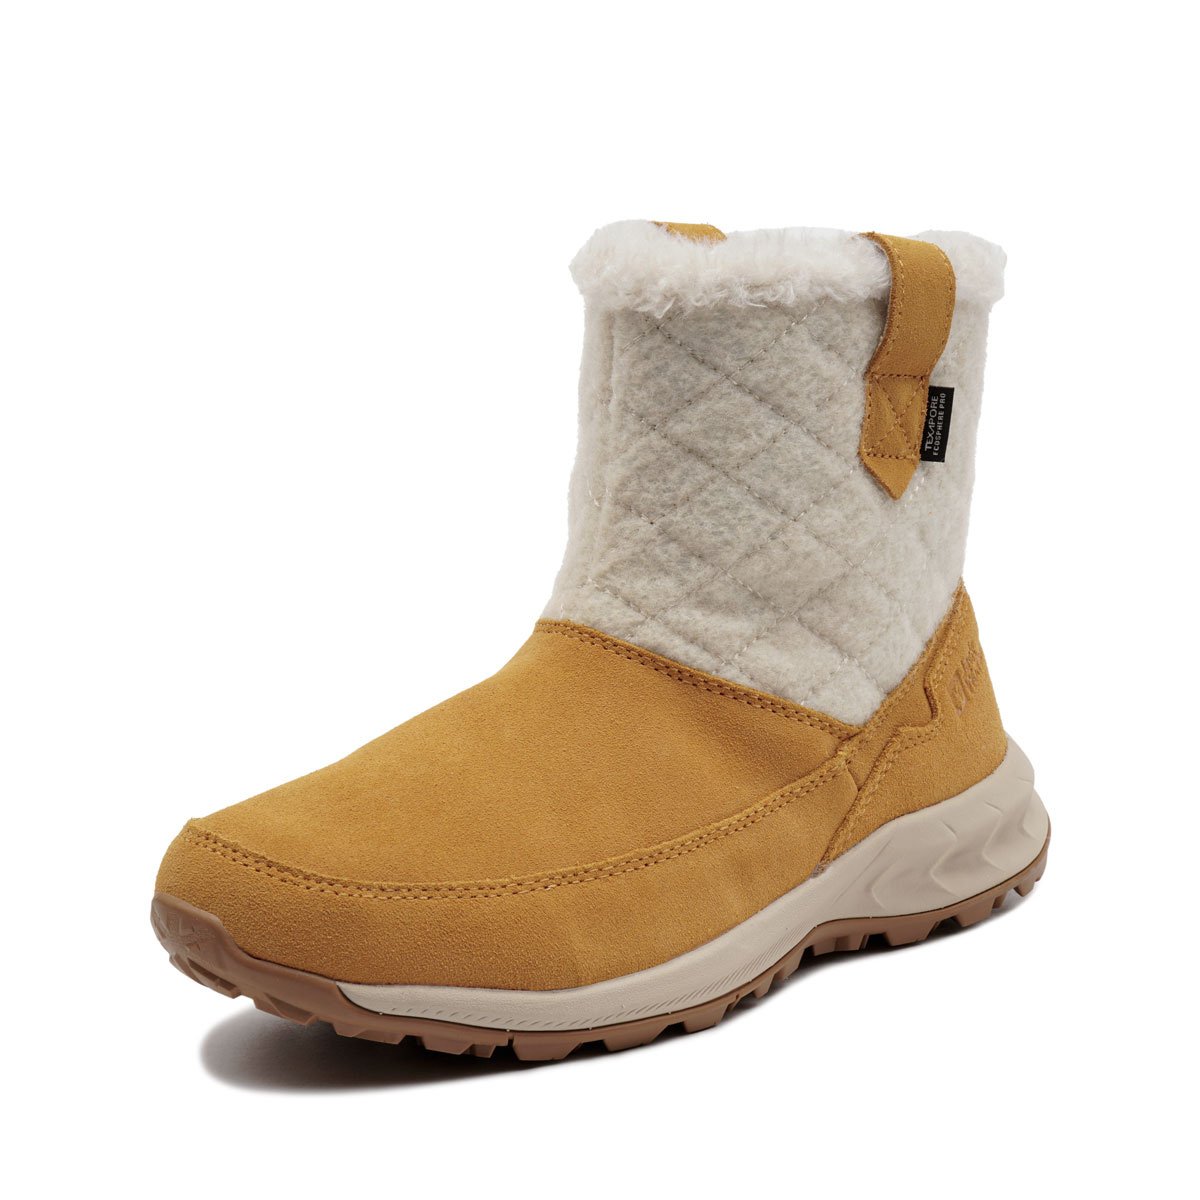 Jack Wolfskin Queenstown Texapore Boot Дамски зимни обувки 4053551-5501